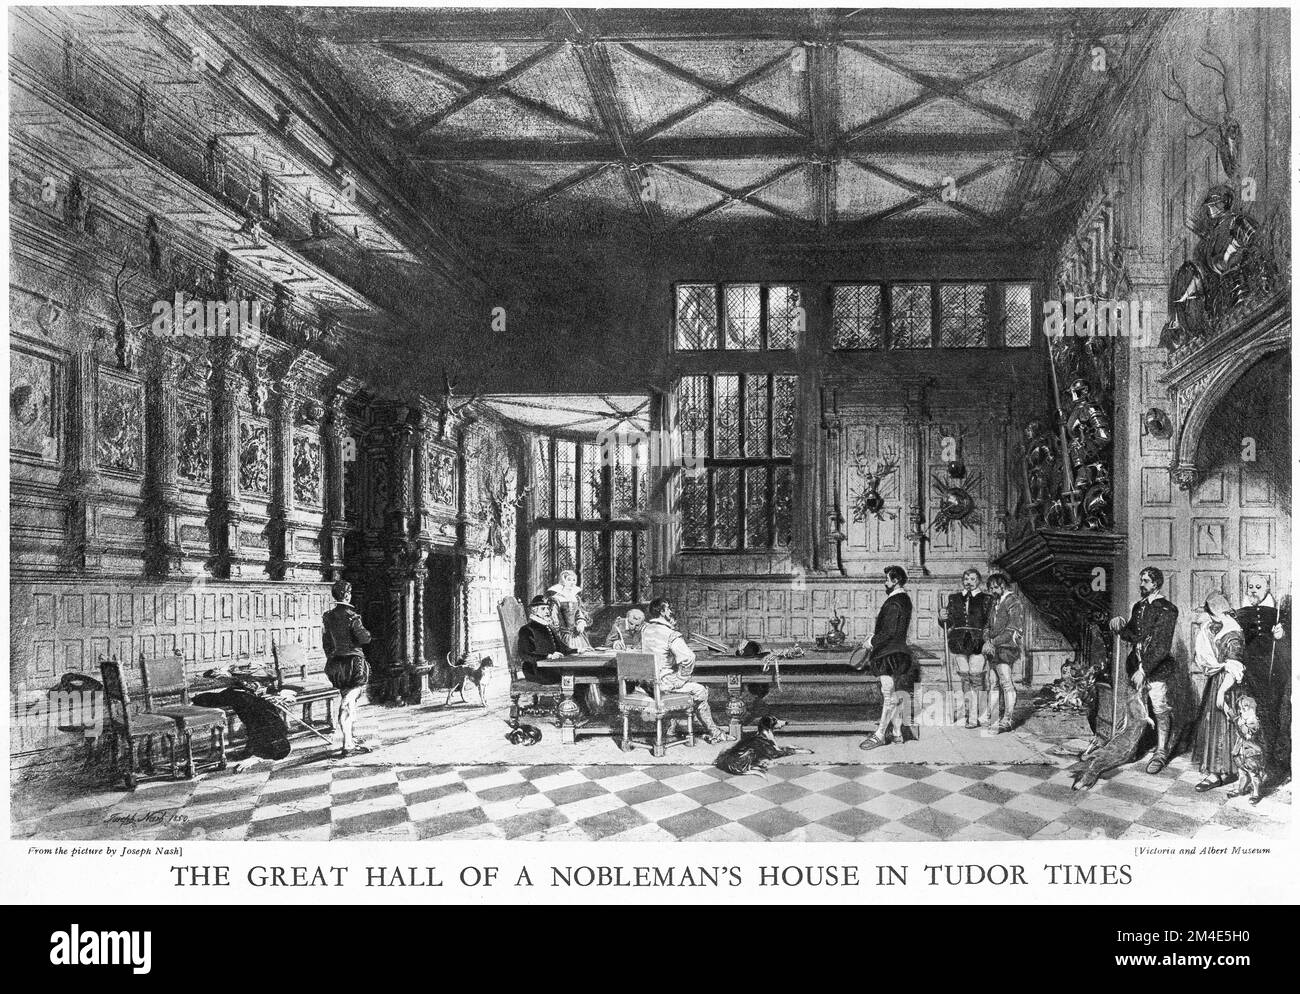 Halftone of the great hall of a nobleman's house in Tudor times, from an educational publication in 1927. Stock Photo